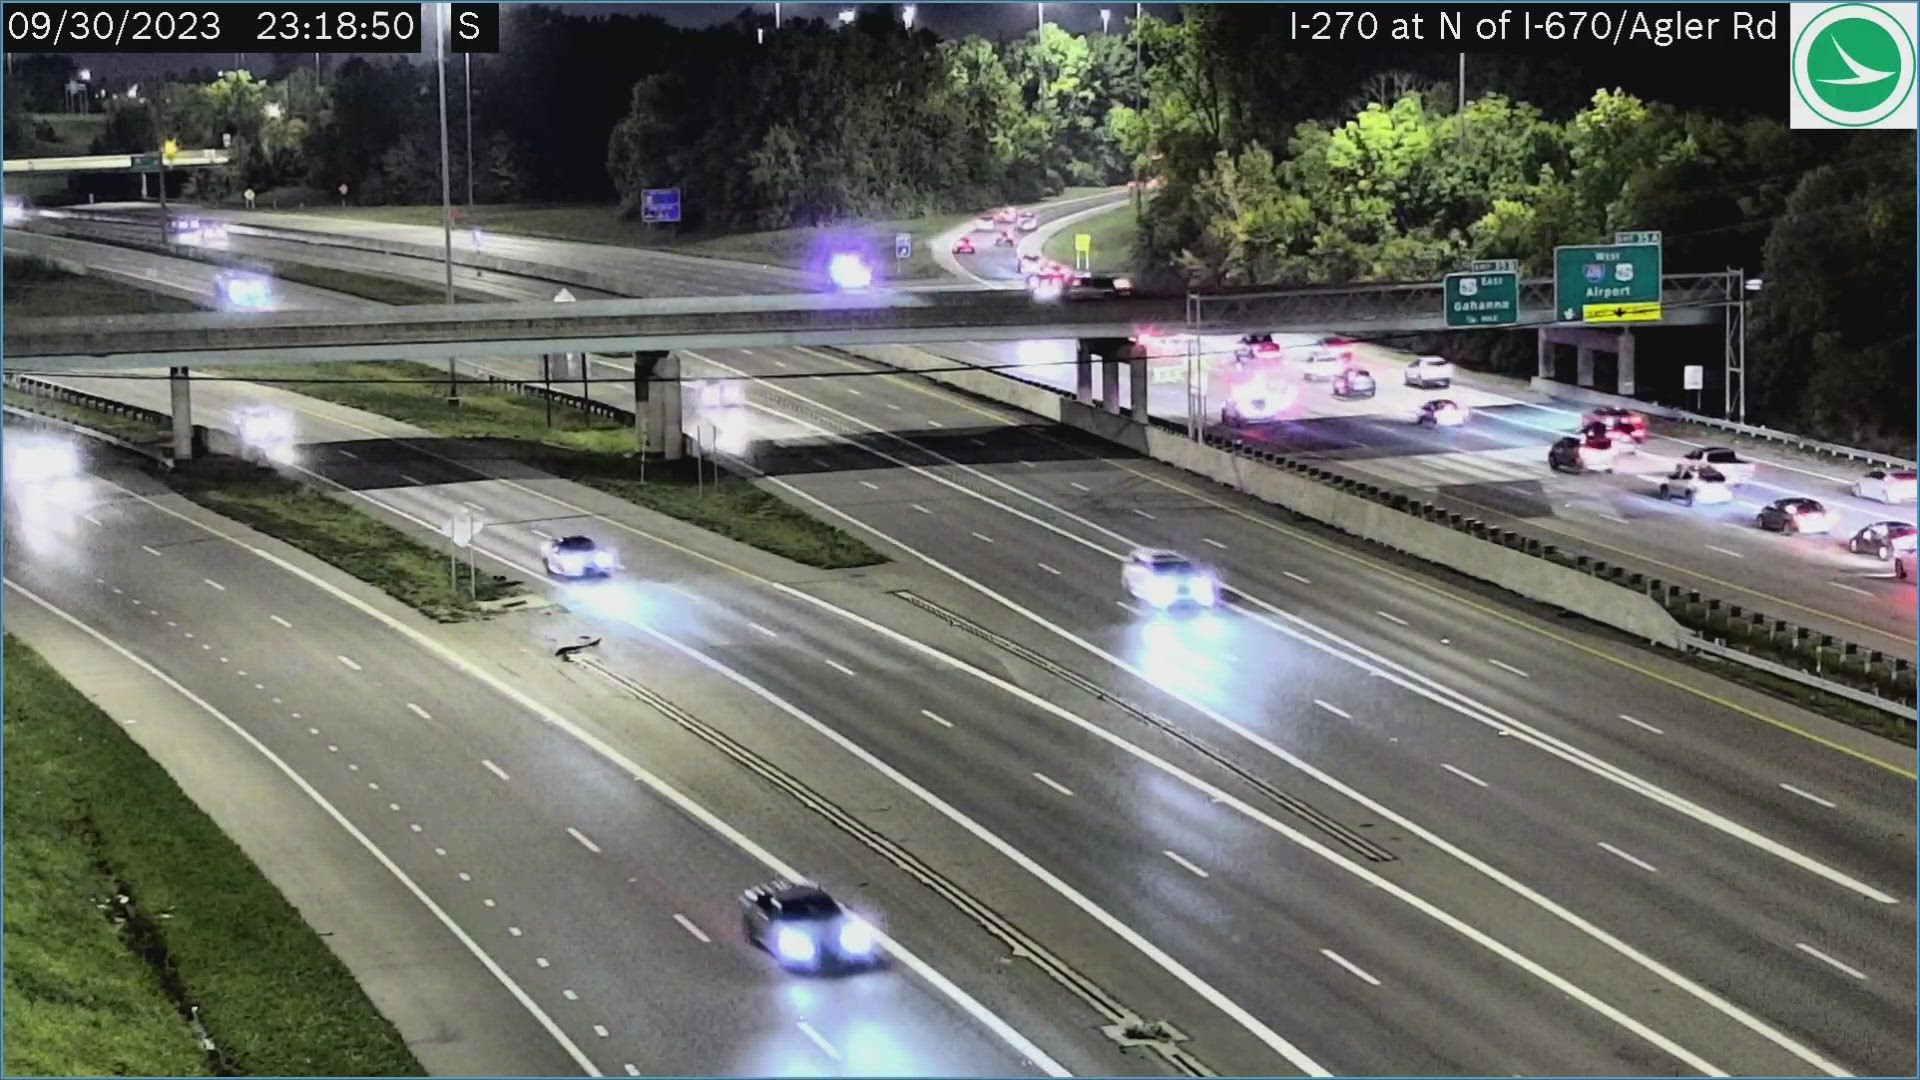 Police said the crash occurred on I-270 southbound near East Broad Street just after 10:40 p.m.